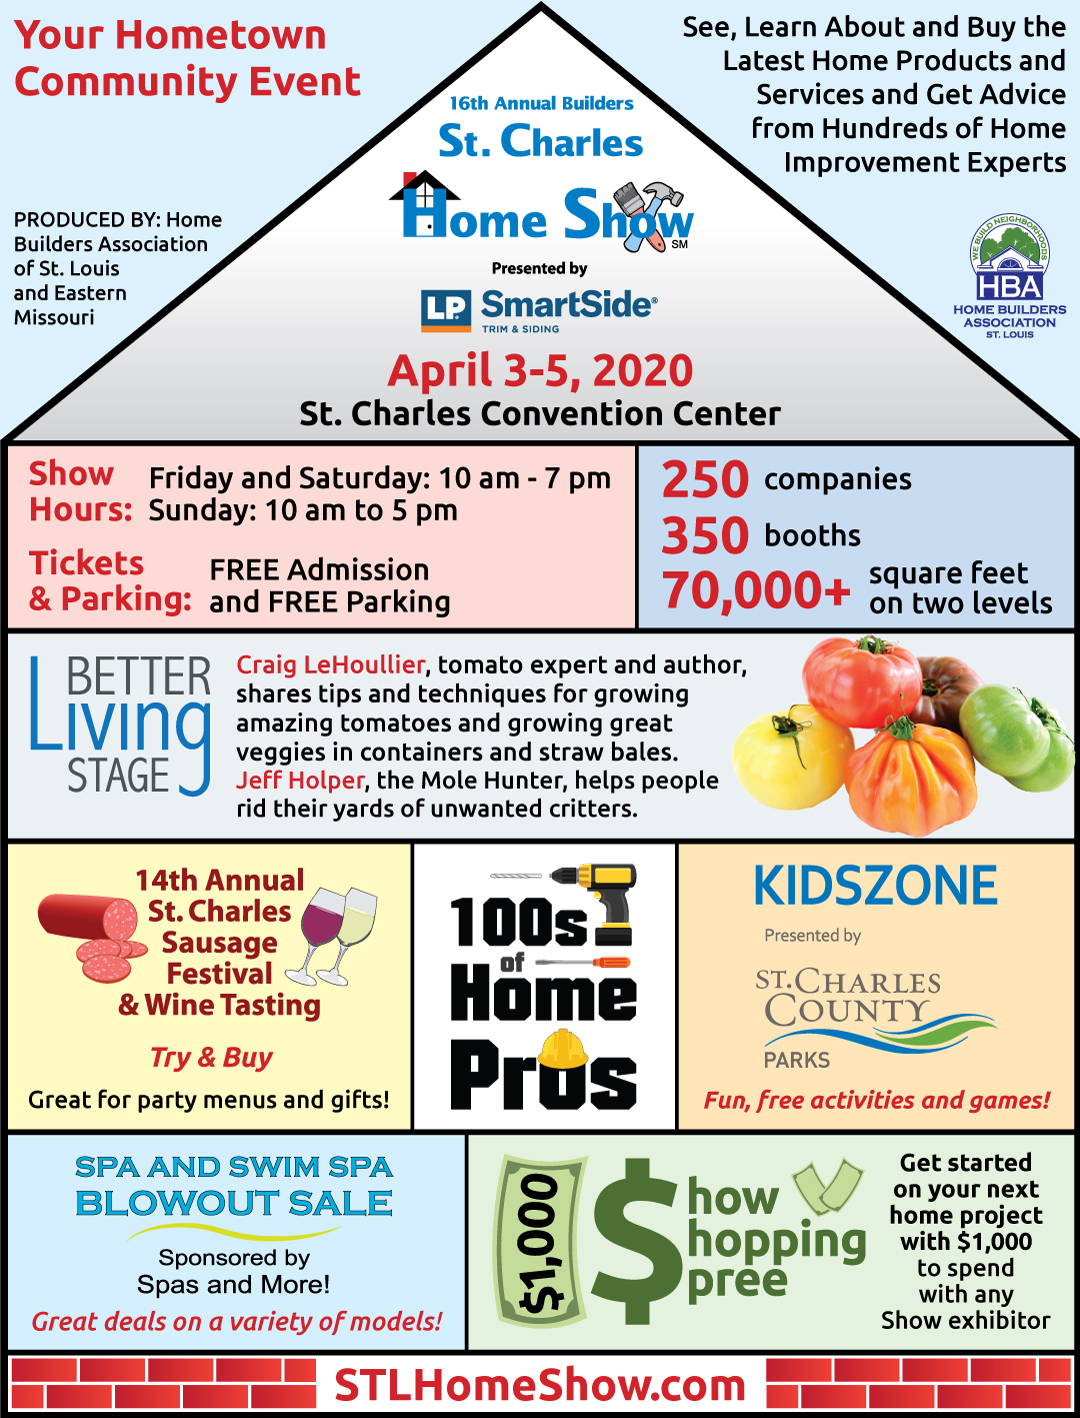 The Builders St. Charles Home Show is the Place for the Latest Home